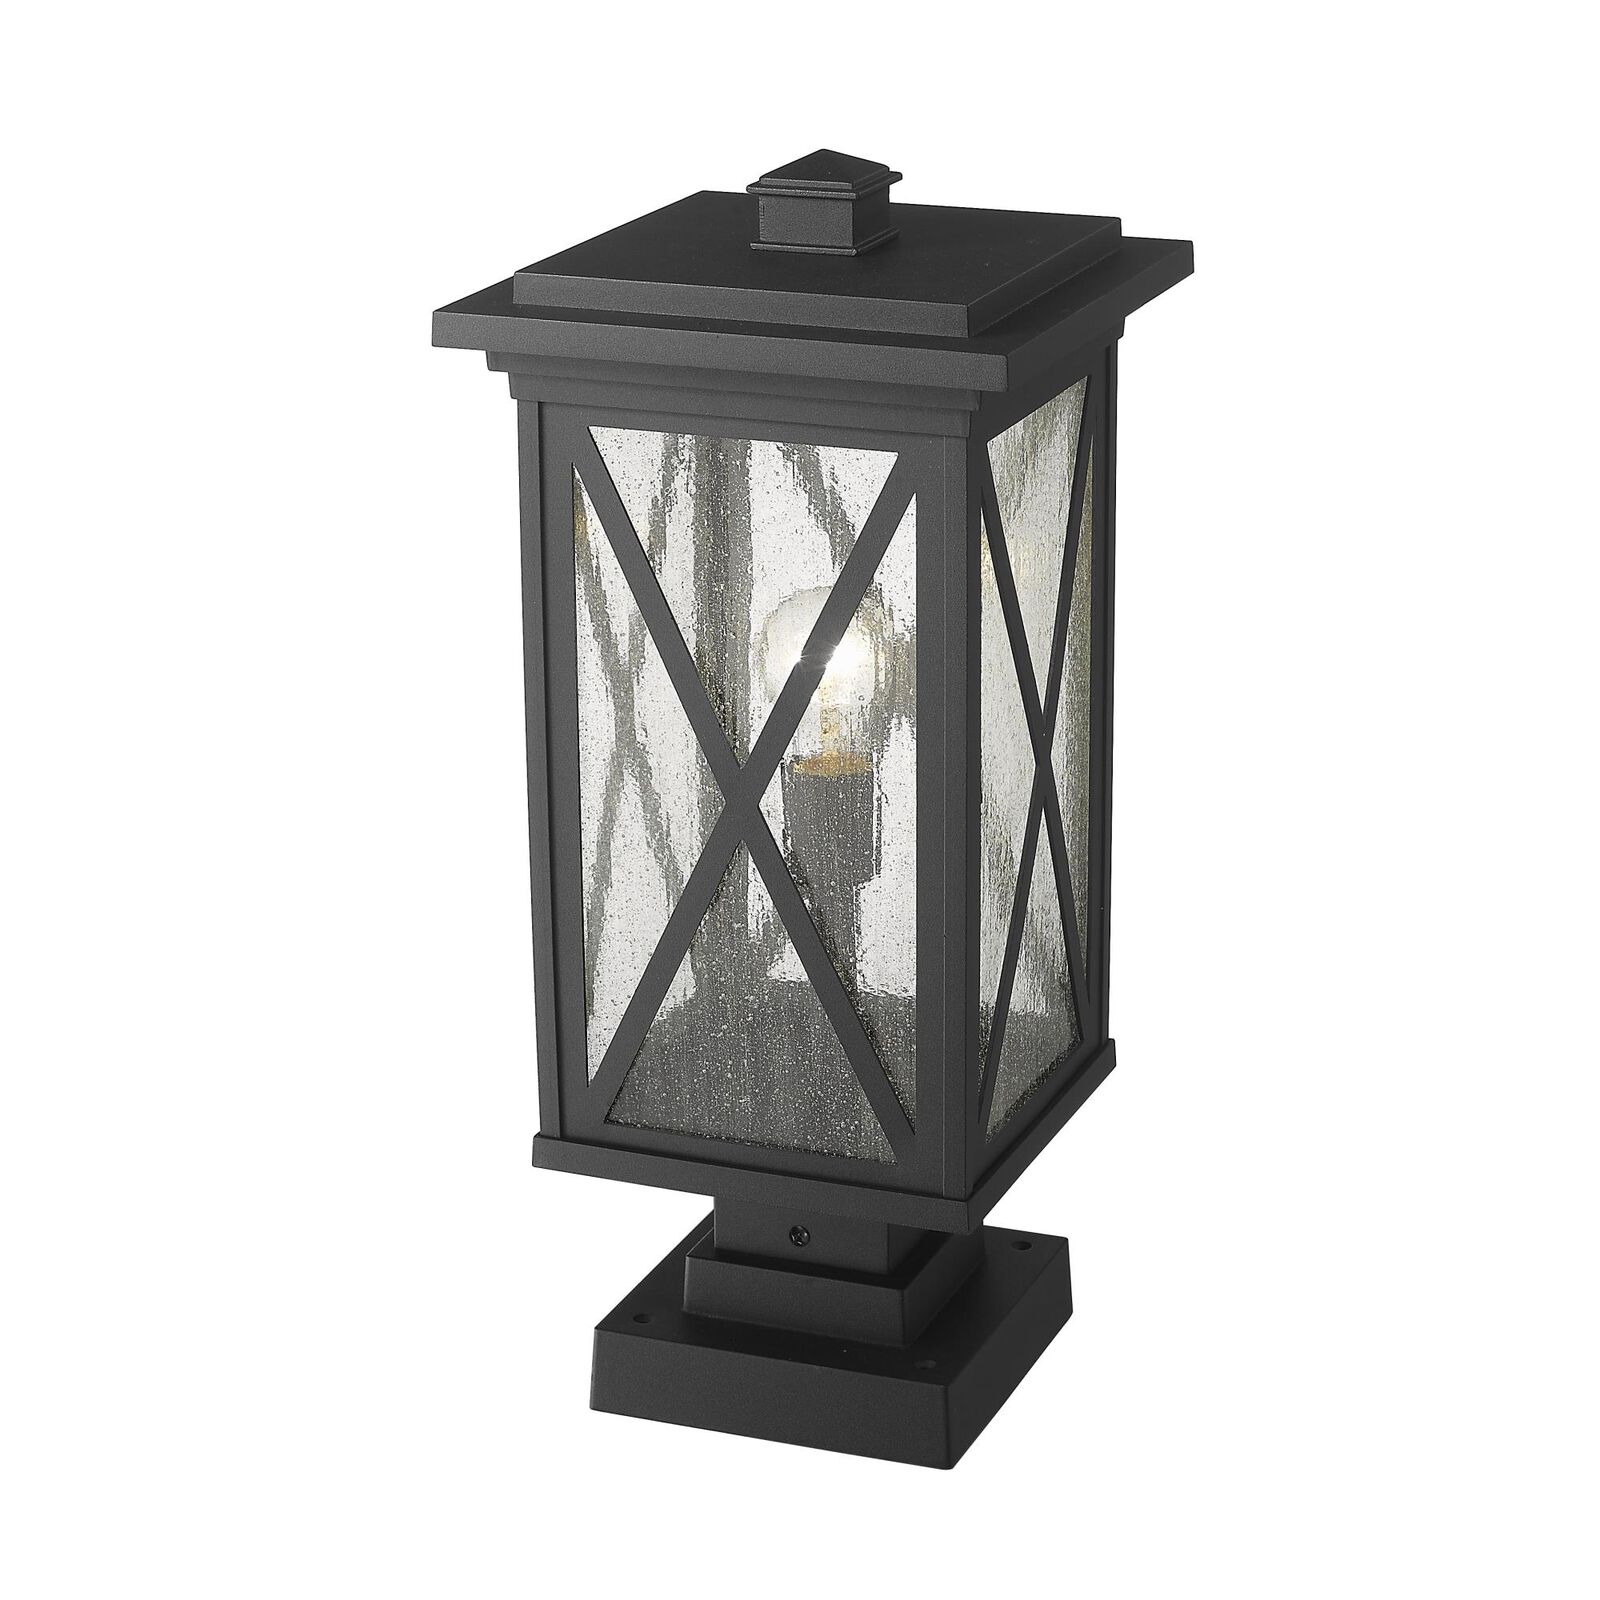 Brookside 21 Inch Tall Outdoor Pier Lamp Capitol Lighting